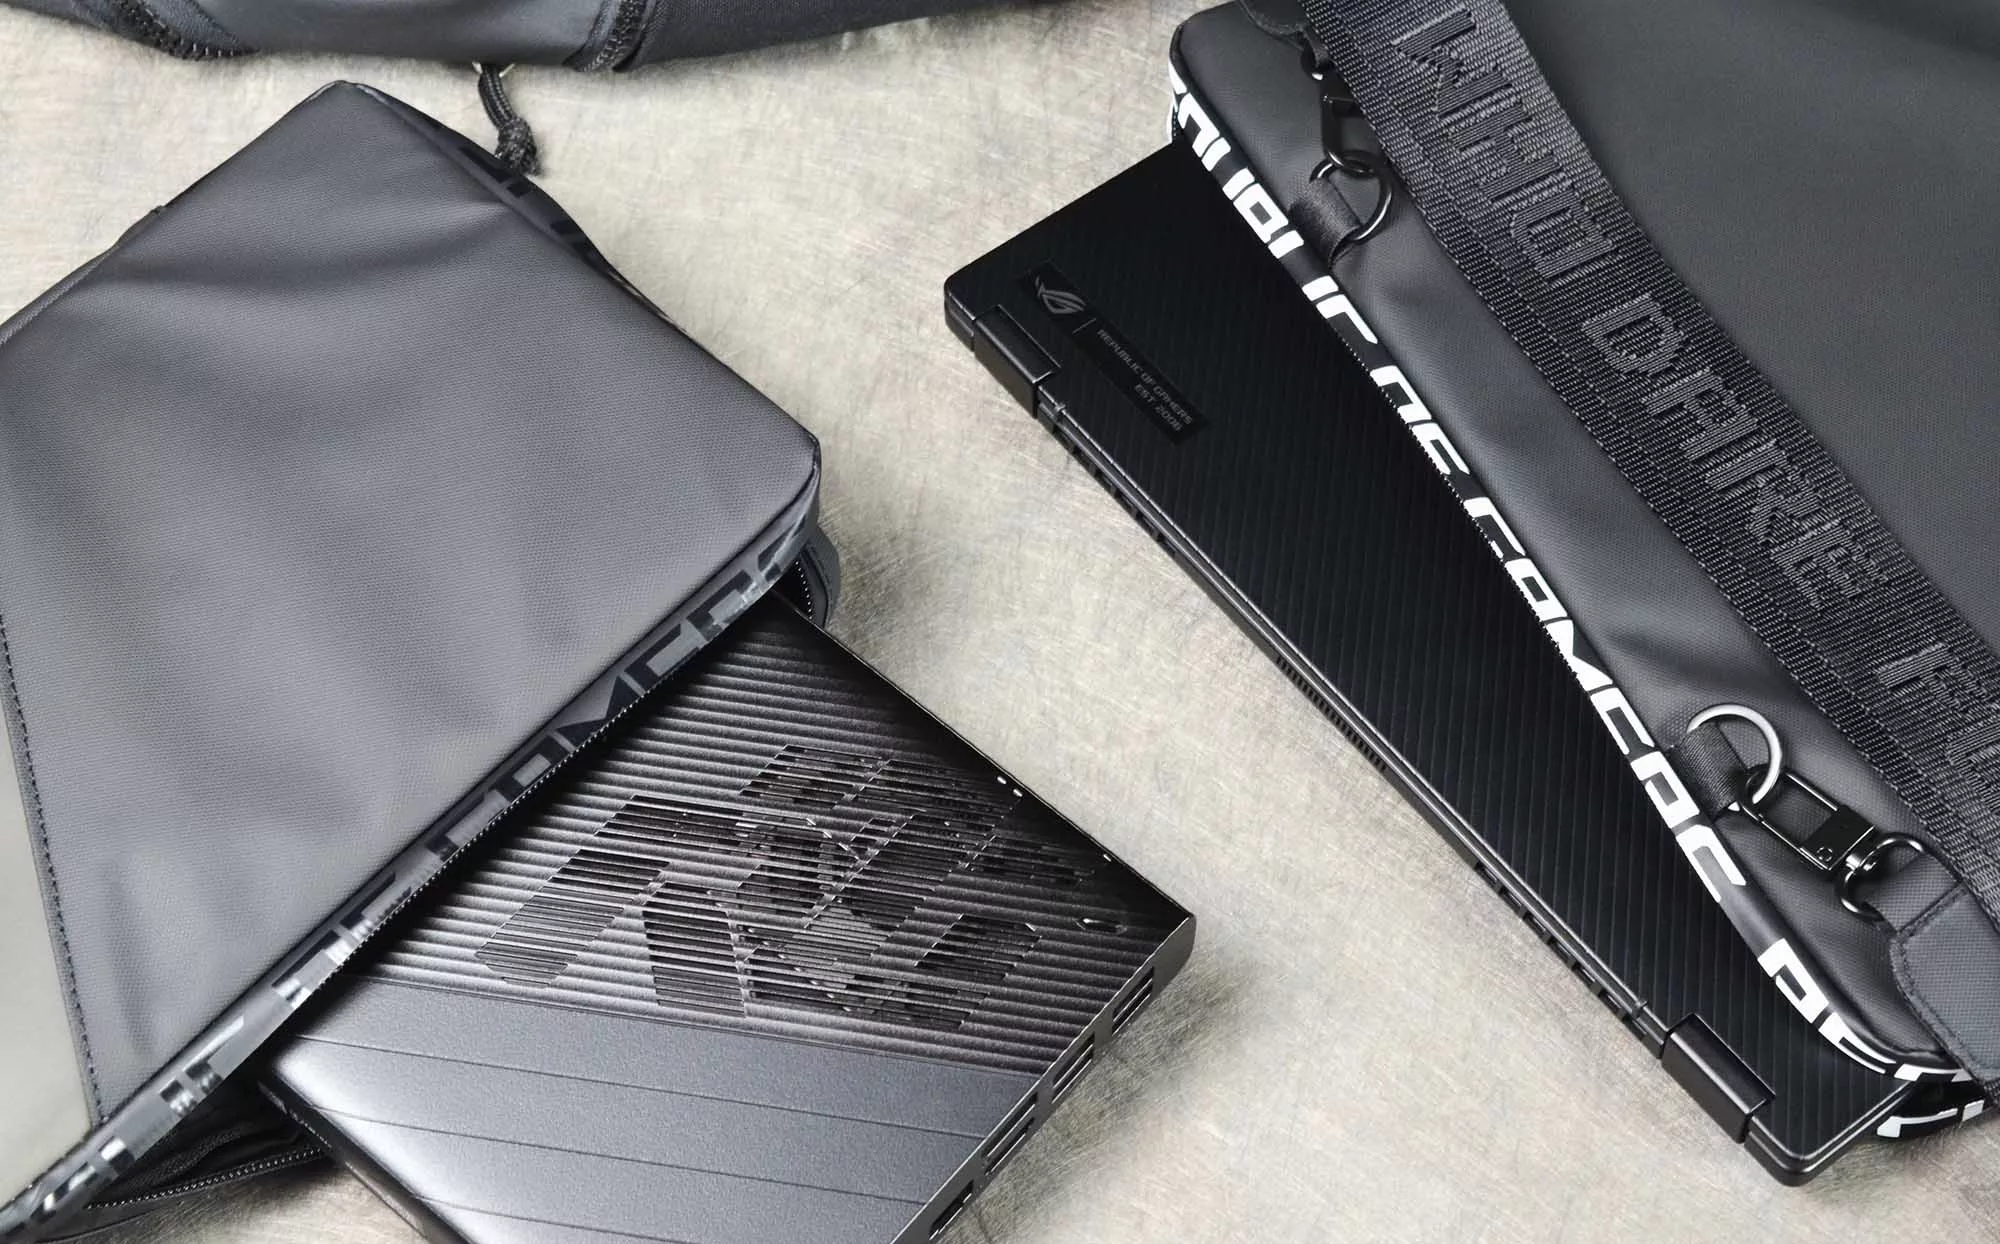 Top down view of Flow X13 and XG Mobile, both peeking out from their carrying cases.